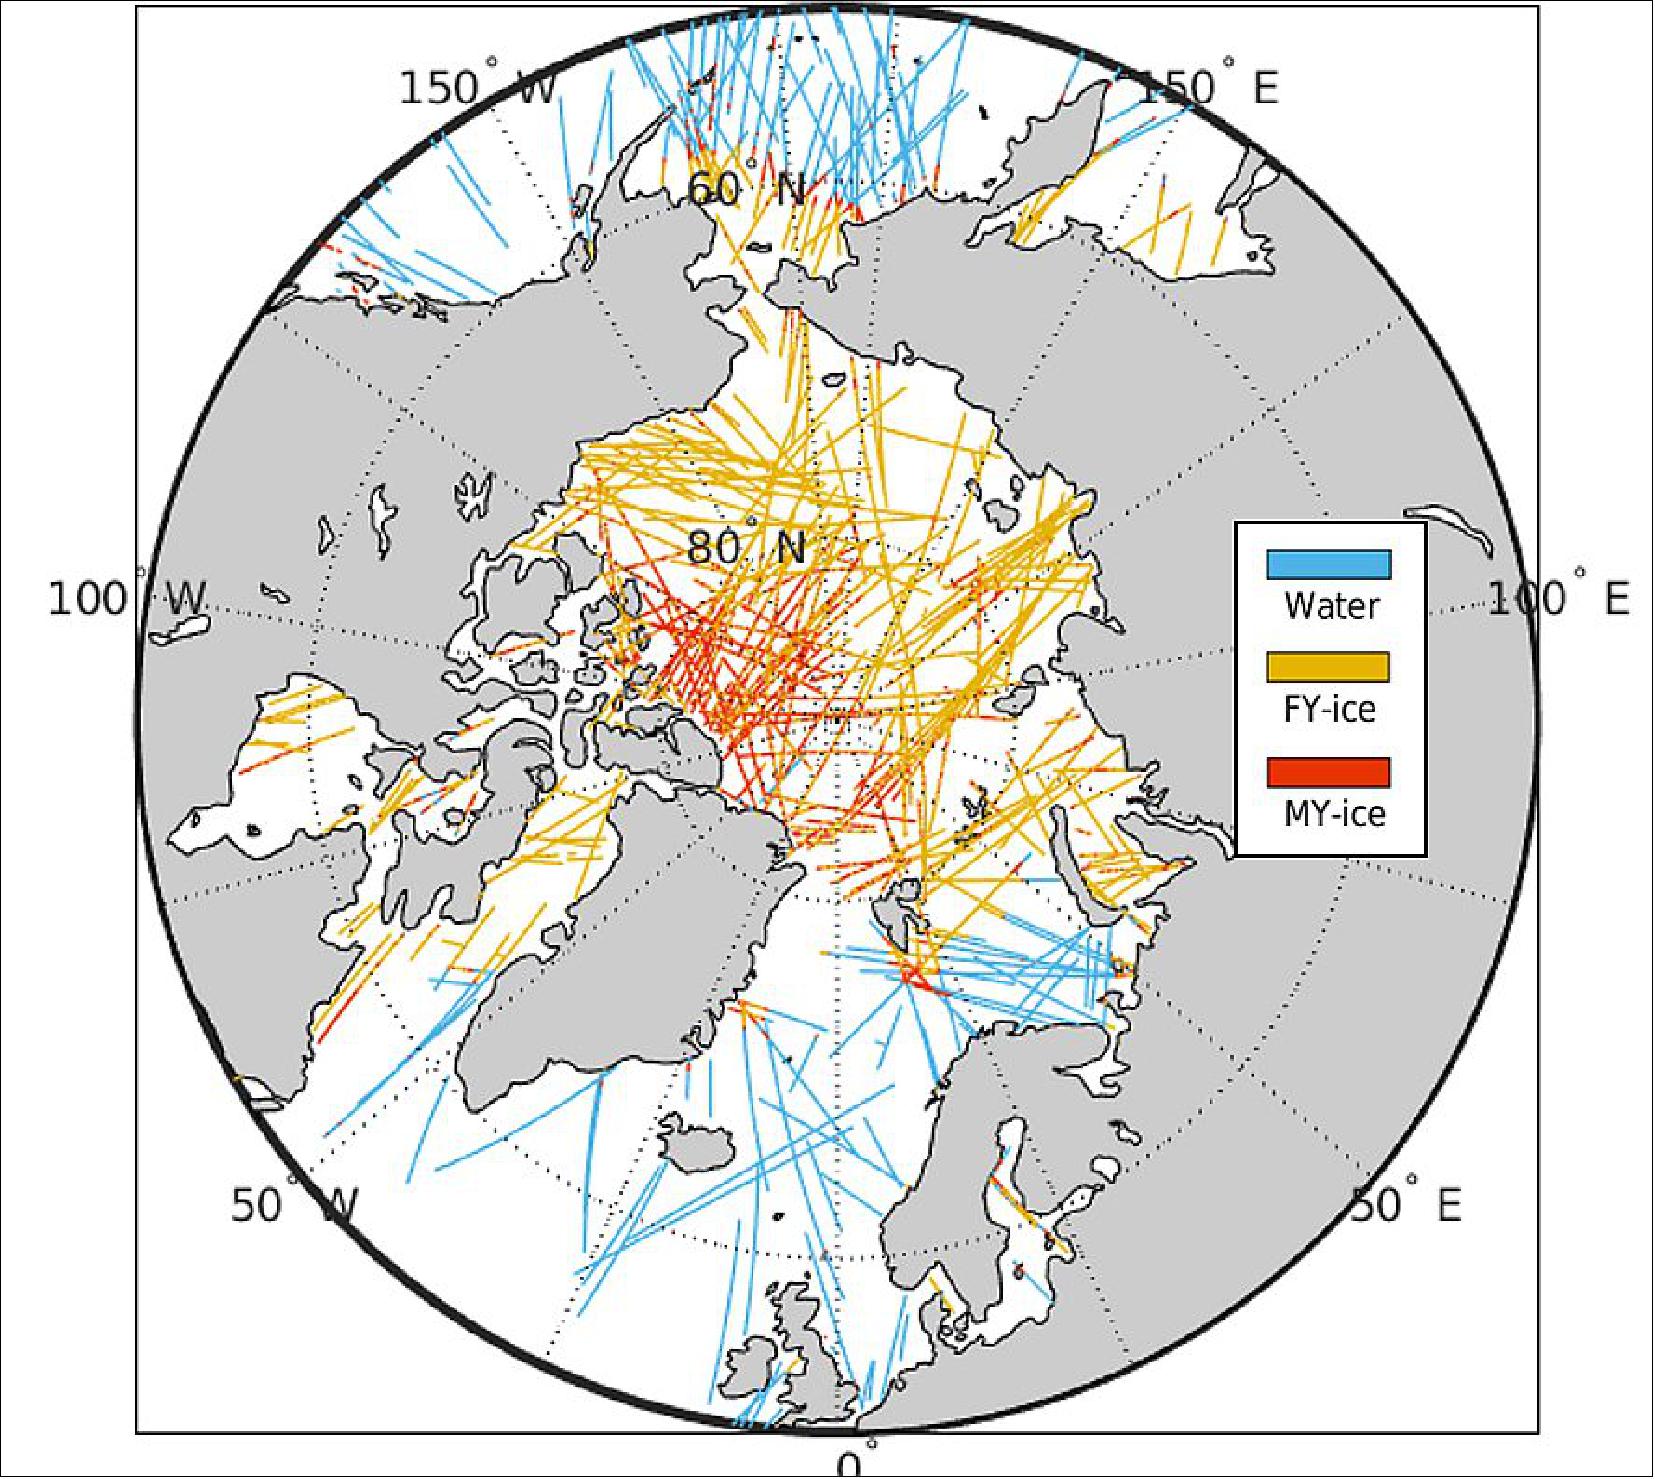 Figure 11: Sea ice coverage and age estimates based on the signal characteristics of GNSS signals that reflect off of the Arctic ice sheets for 4-10 March 2020, via the Spire Sea Ice Level 2 Grazing Angle Reflectometry product (image credit: Jade Morton, Univ. of Colorado-Boulder)